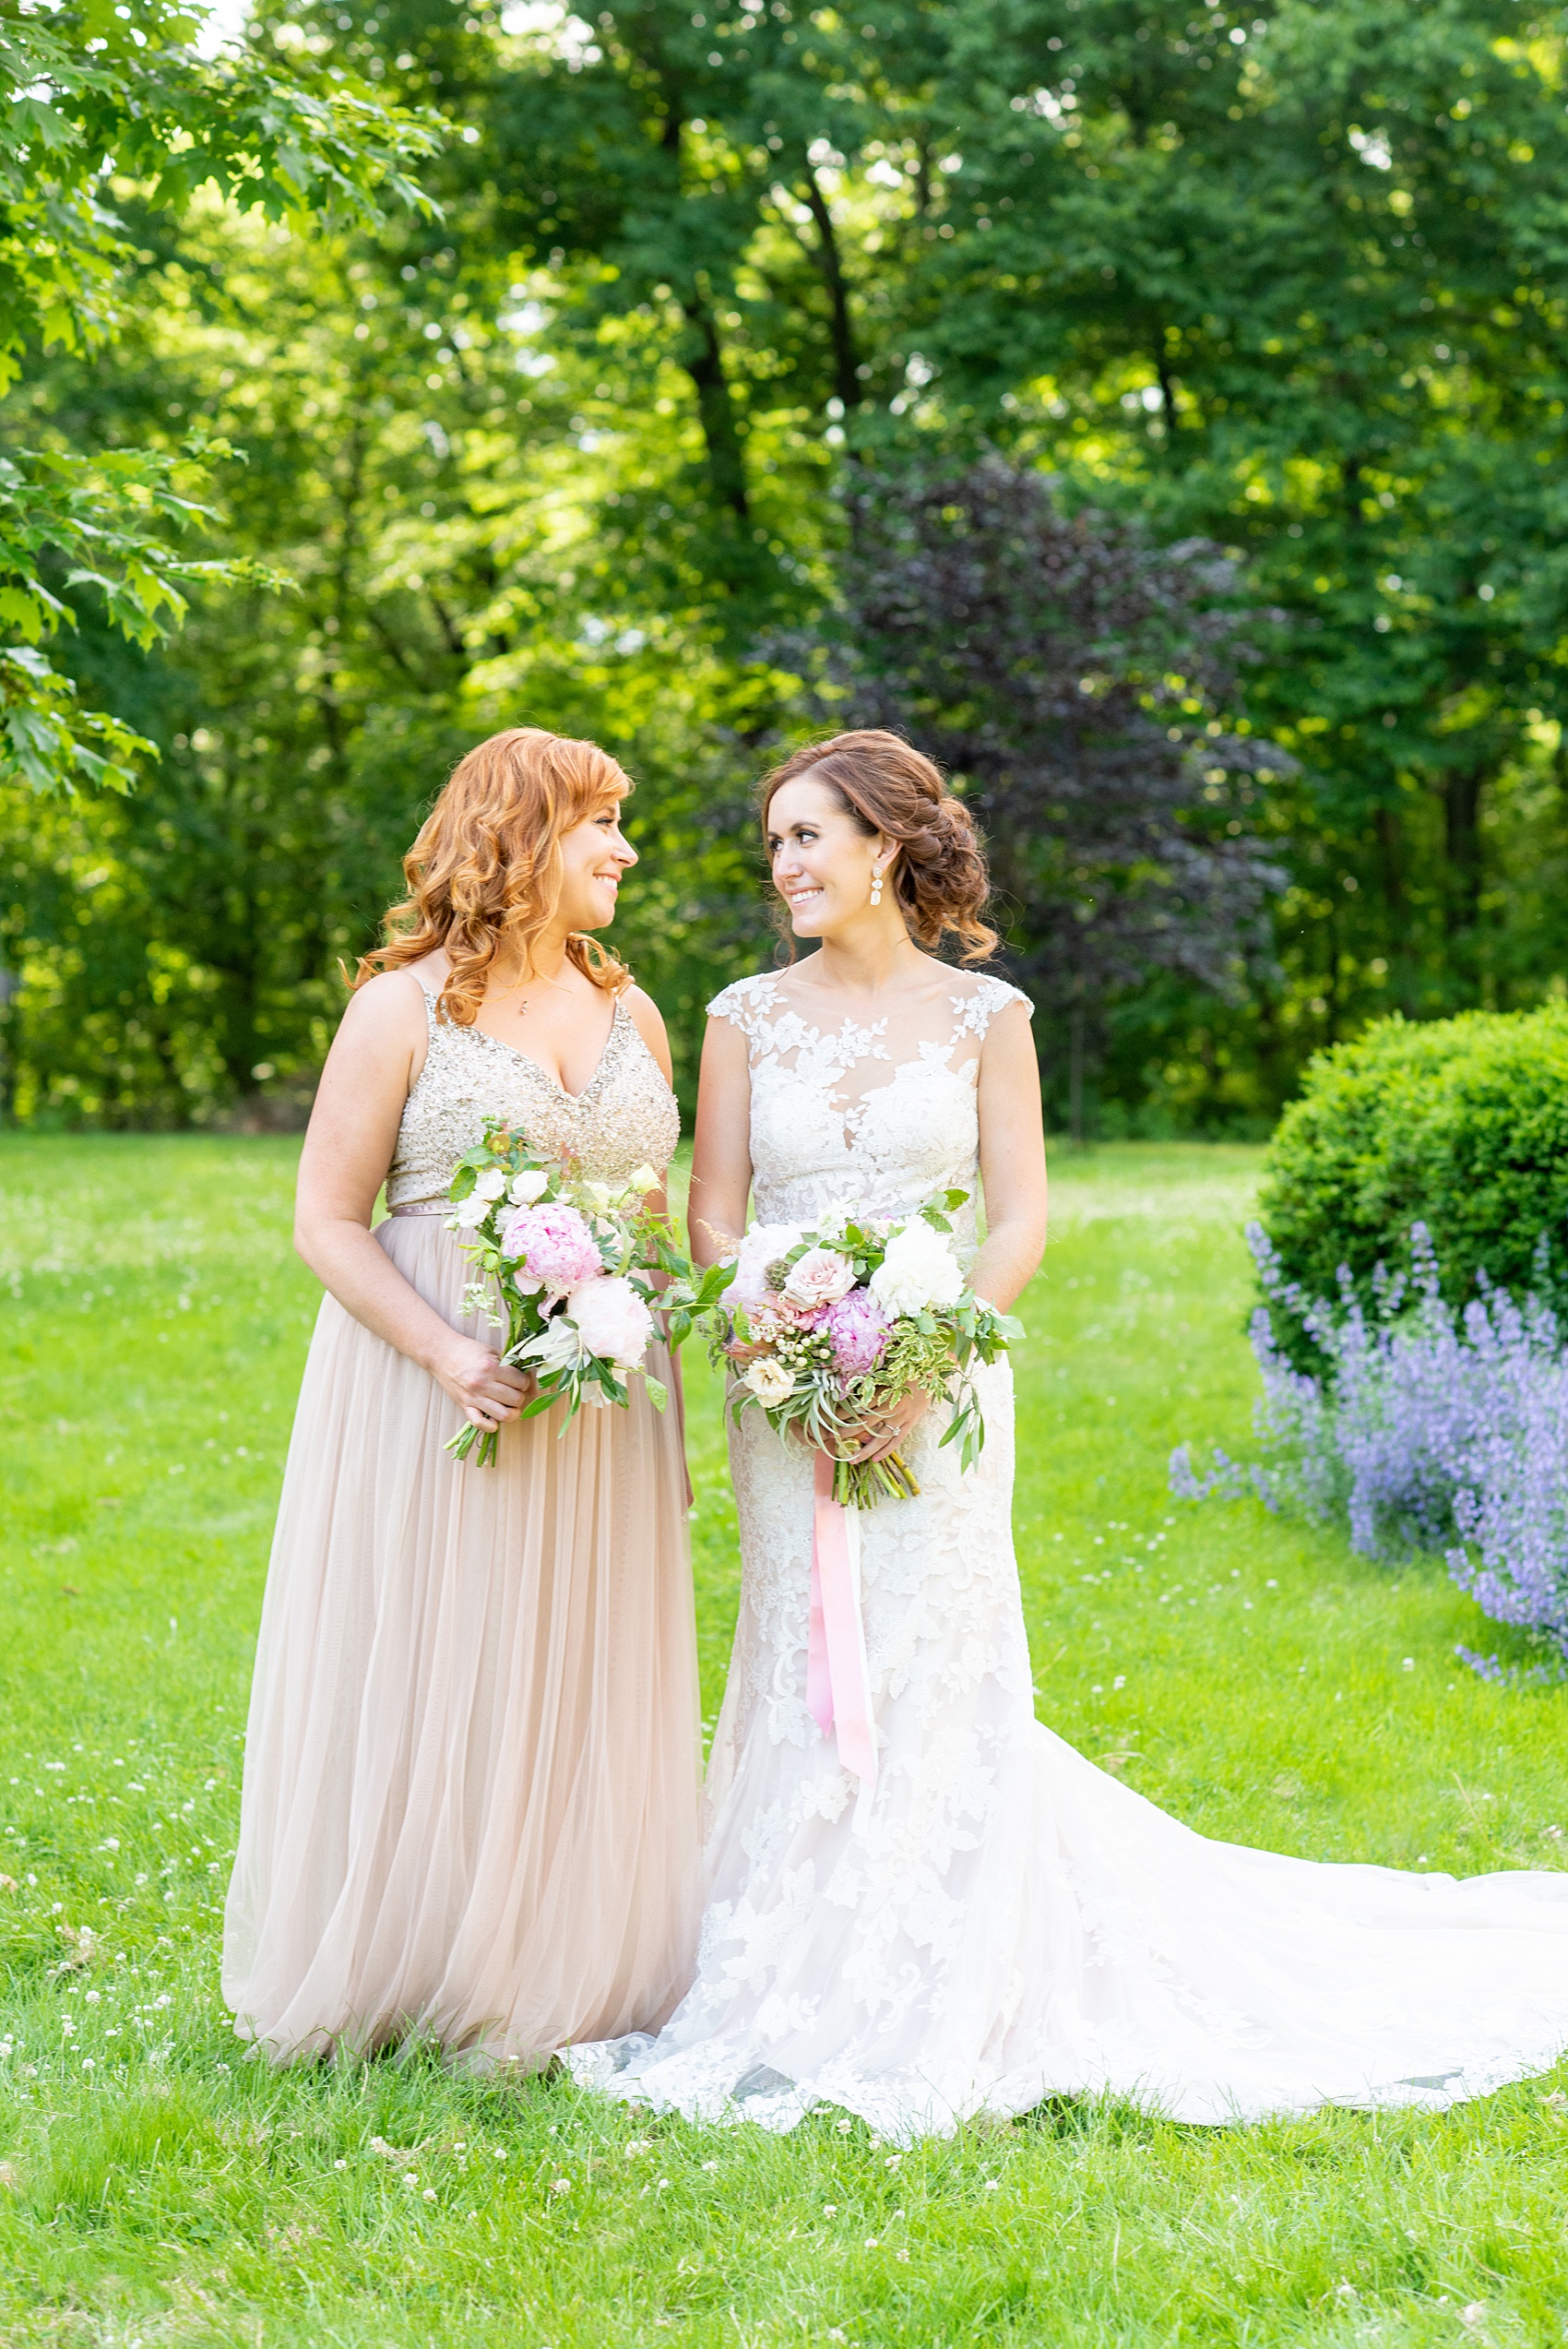 A summer wedding at Olde Mill Inn, NJ. Photos by Mikkel Paige Photography. This New Jersey venue is a great option for an event not too far from NYC. The wedding party photos were at nearby Cross Estate Gardens, a beautiful lush area for bridal party photos. The bridesmaids wore light pink, mis-matched gowns. Click through for their complete wedding recap! #OldeMillInn #NJwedding #NJweddingphotographer #mikkelpaige #NewJerseyWeddingVenue #NewJerseyWedding #CrossEstateGardens #weddingdetails #bridalparty #pinkbridesmaids #mismatcheddresses #mismatchedbridesmaids